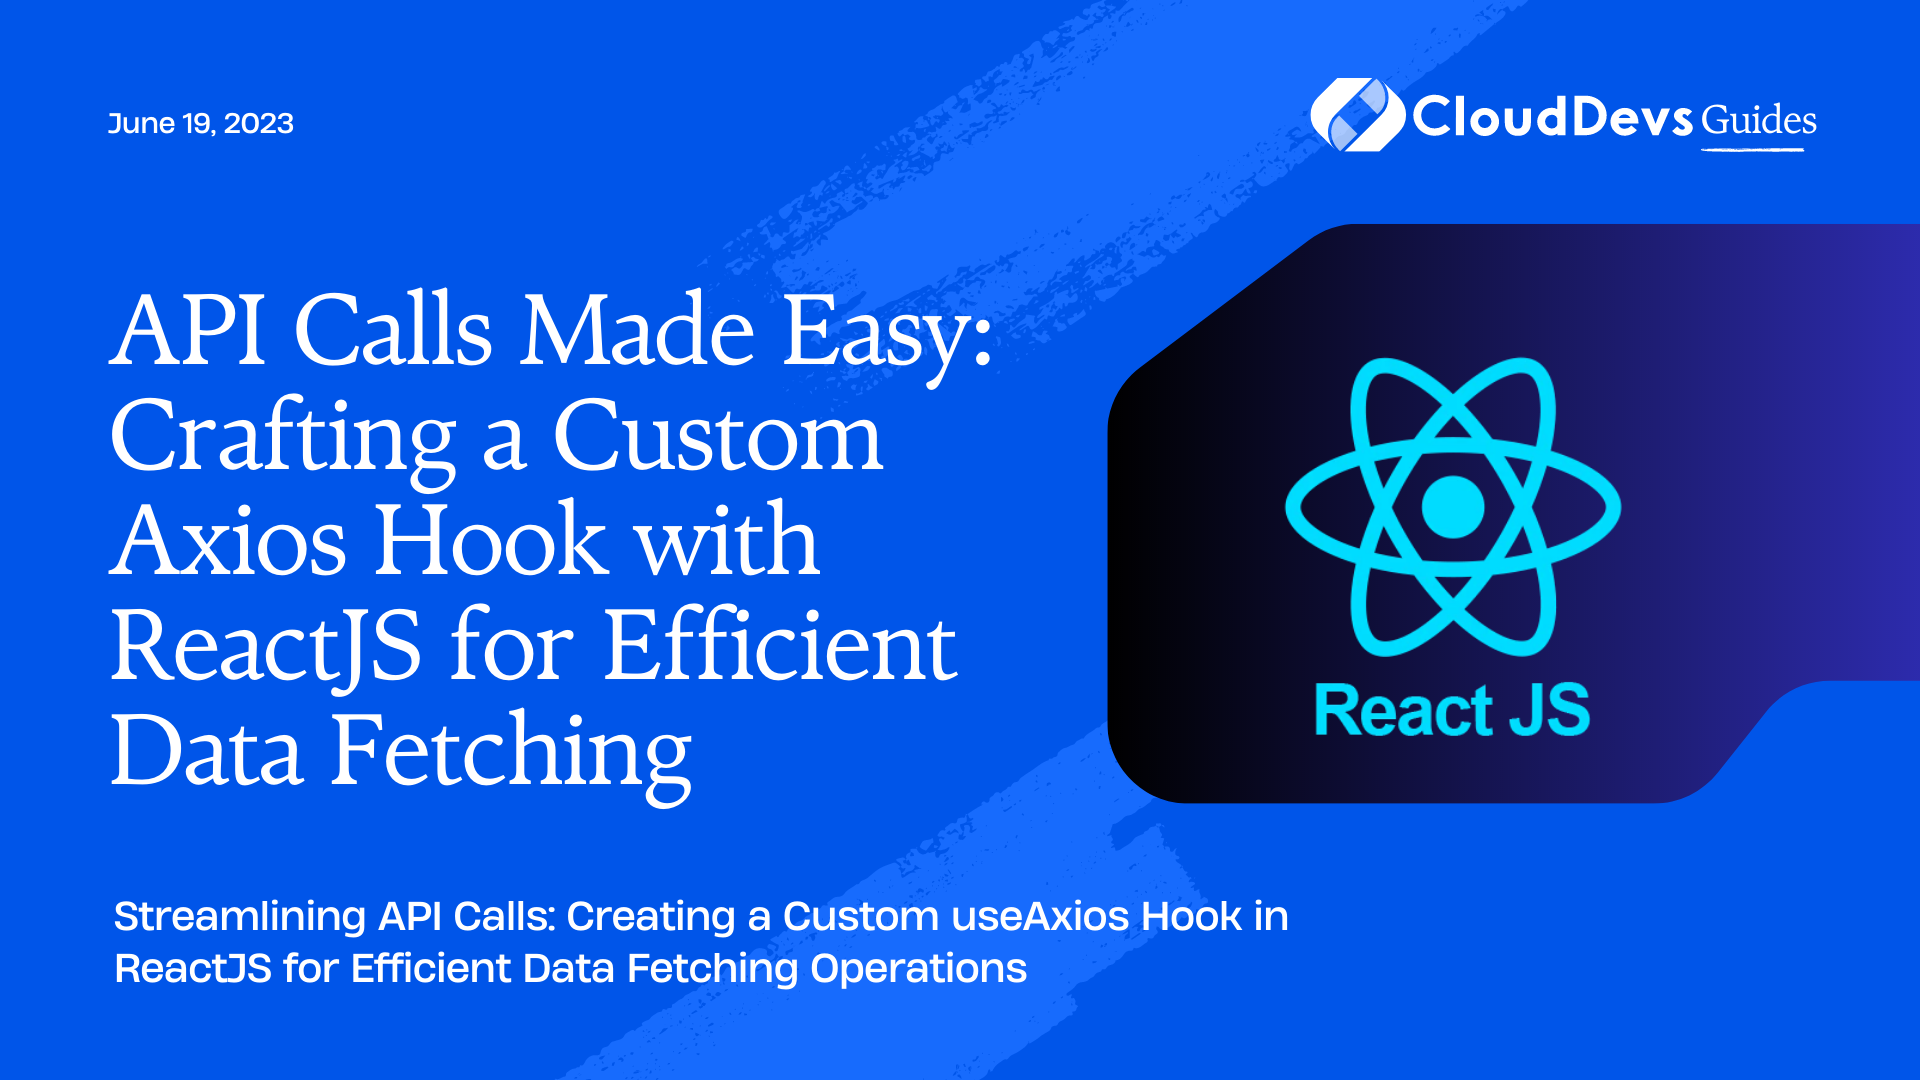 API Calls Made Easy: Crafting a Custom Axios Hook with ReactJS for Efficient Data Fetching